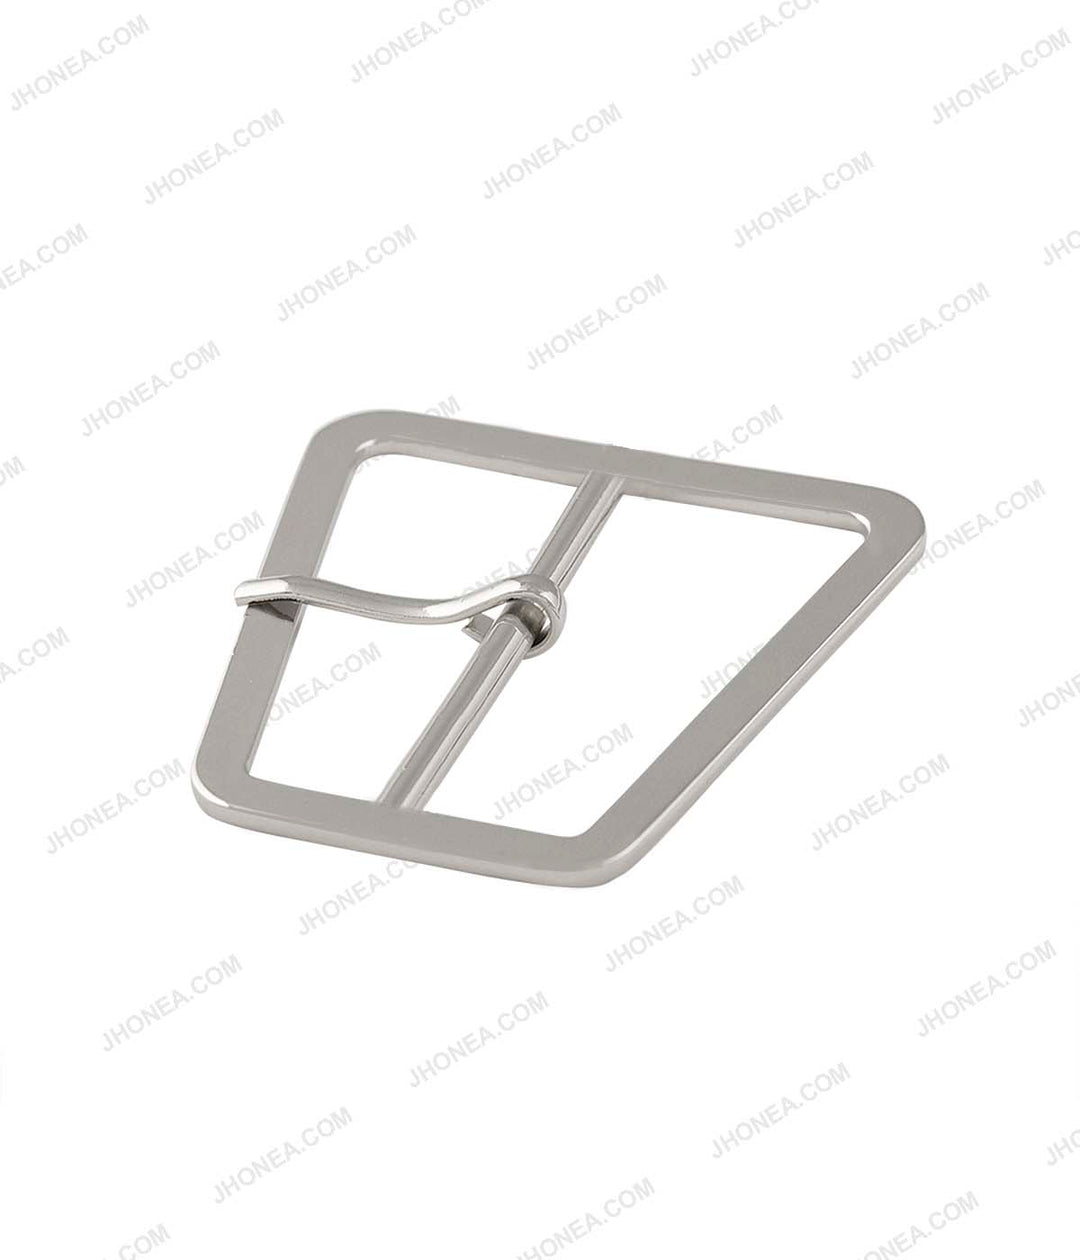 Superior Western Style Trapezoid Shape Prong Belt Buckle in Shiny Silver  Colour